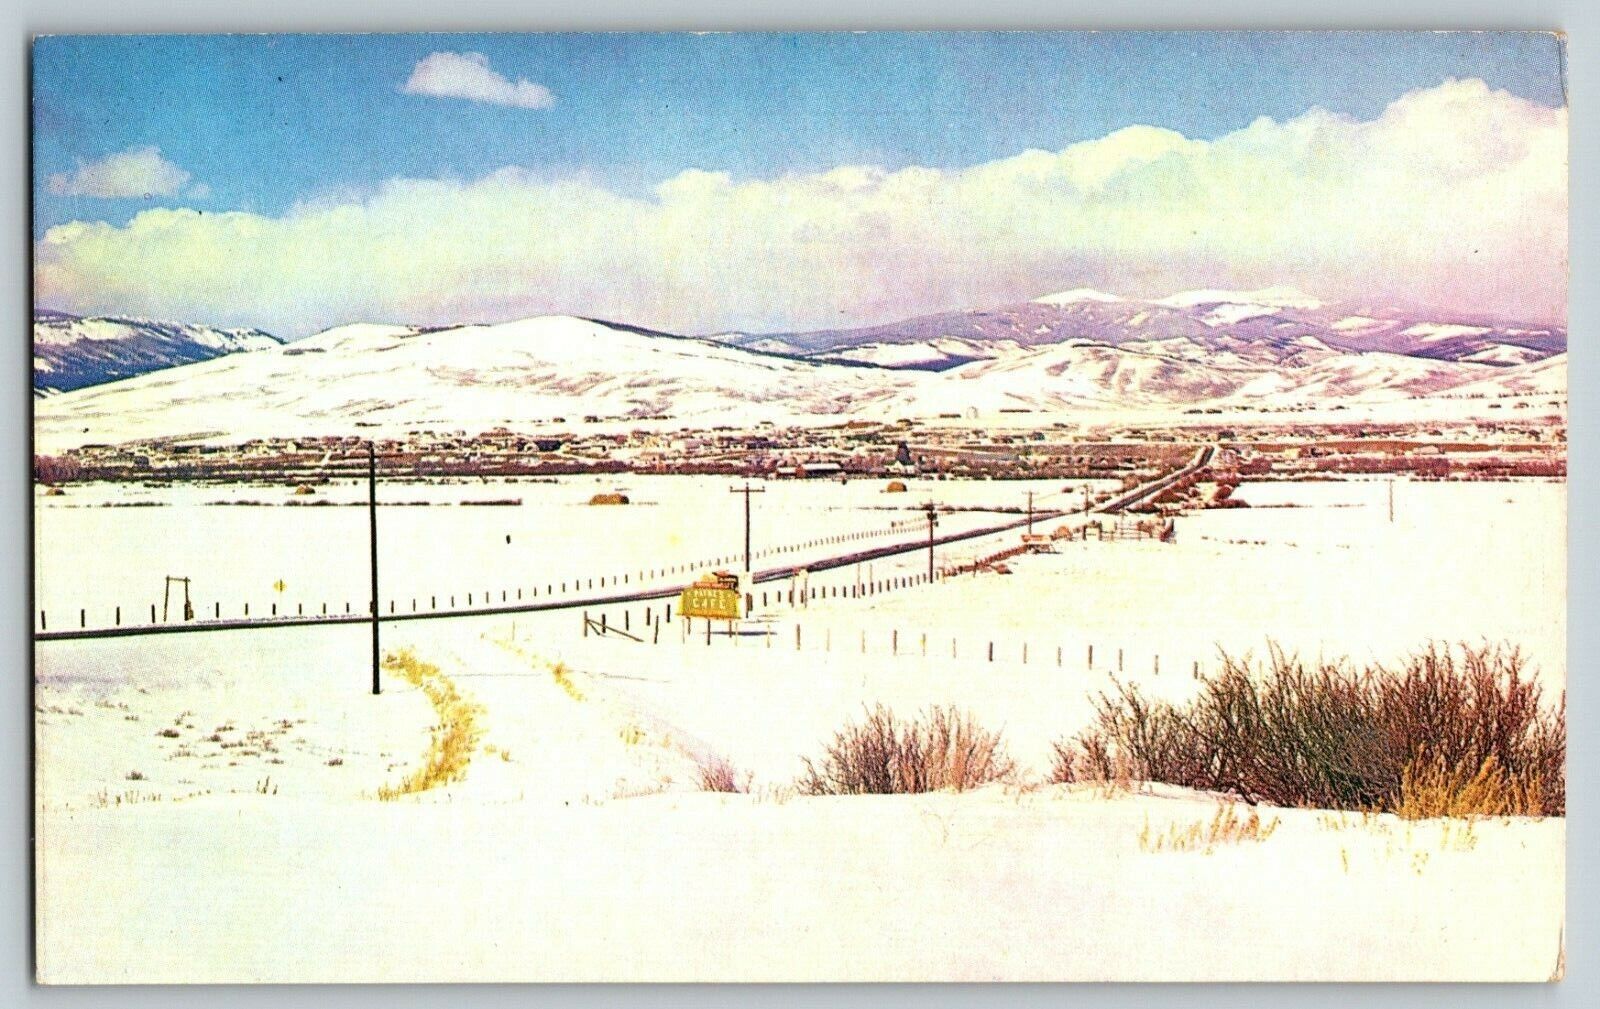 SNOWCAPPED MOUTAIN BACKDROP TOWN OF GRANBY COLORADO ON US 40 VTG POSTCARD